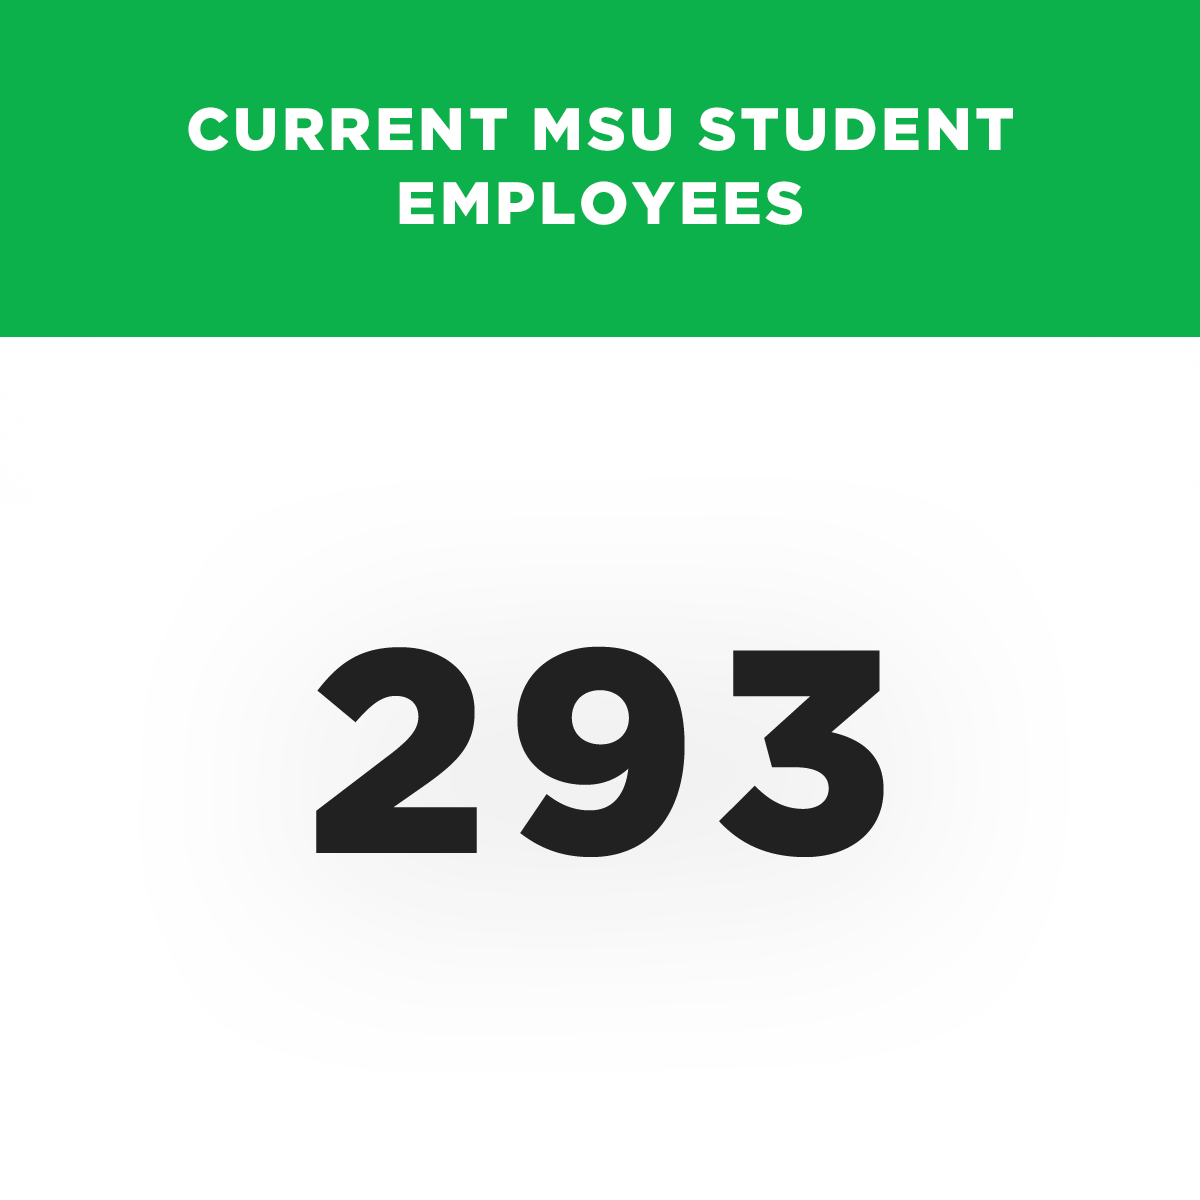 Current MSU Student Employees - 293